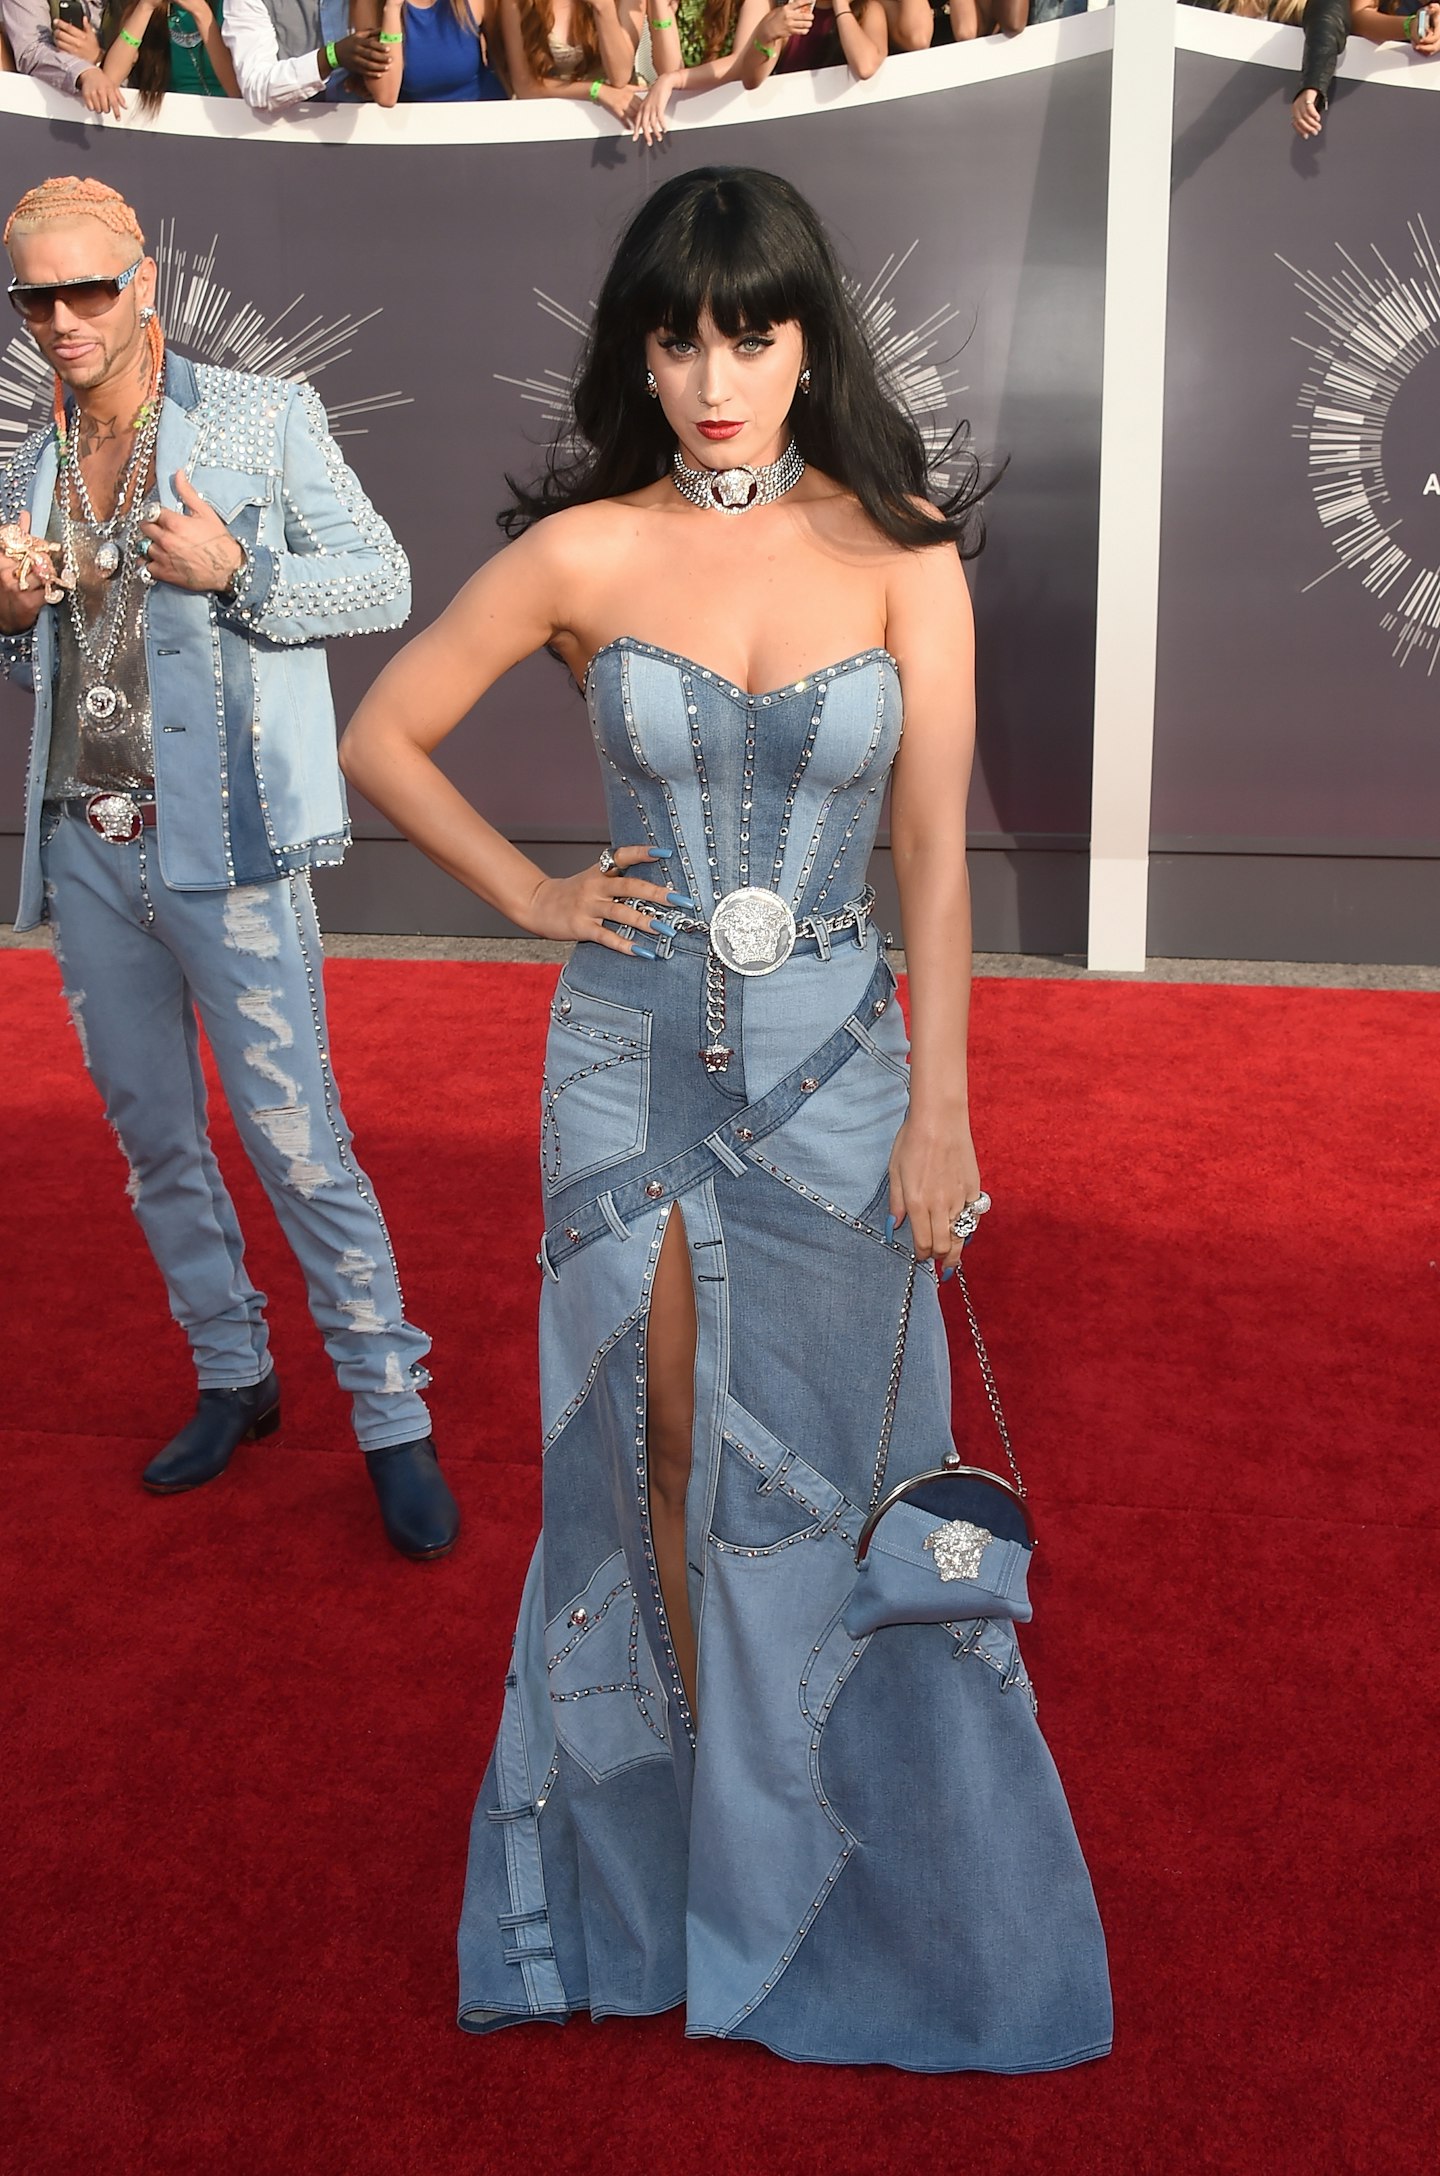 Katy Perry in double denim on the red carpet at the VMAs